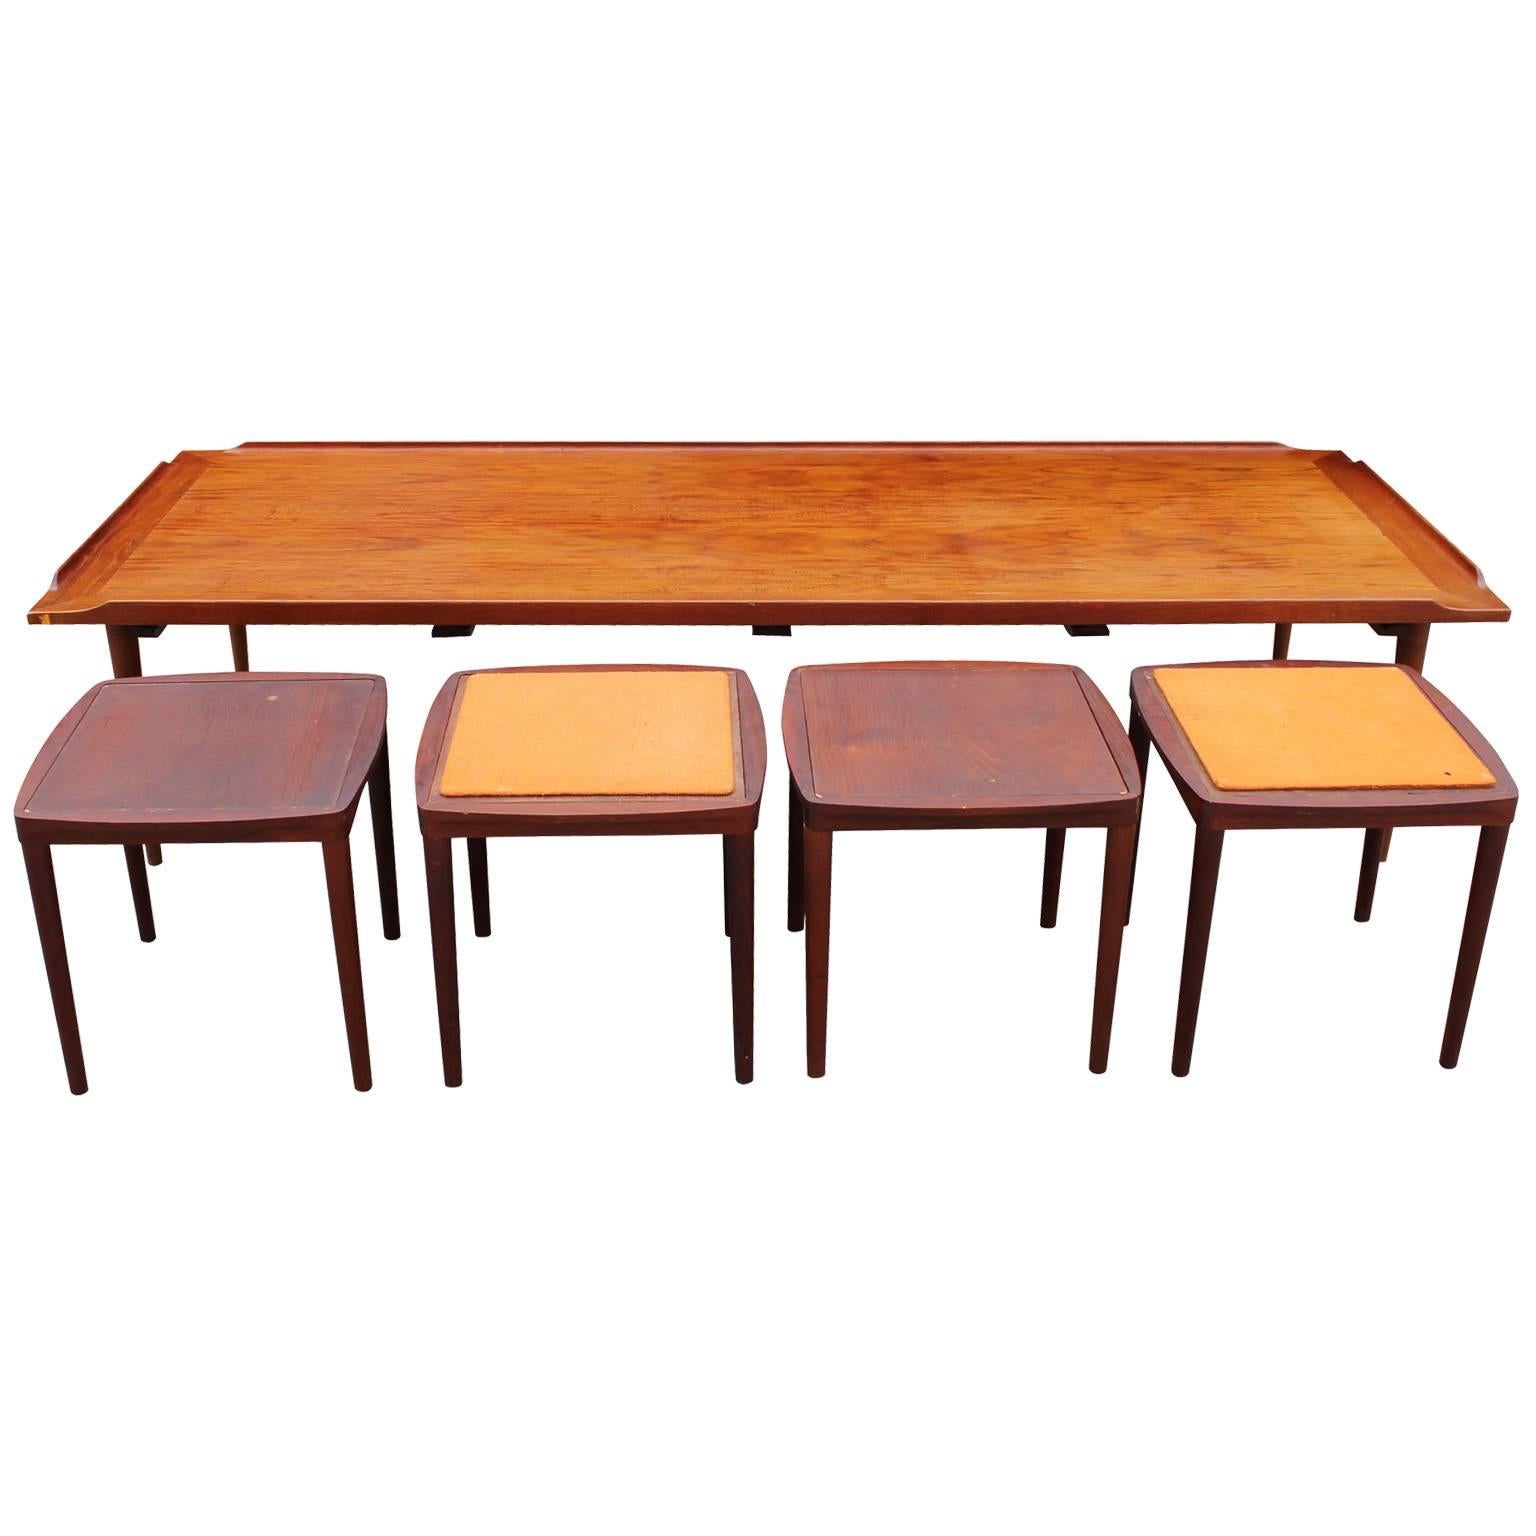 Teak Mid Century Modern Danish Coffee Table with Reversible Stools / Tables